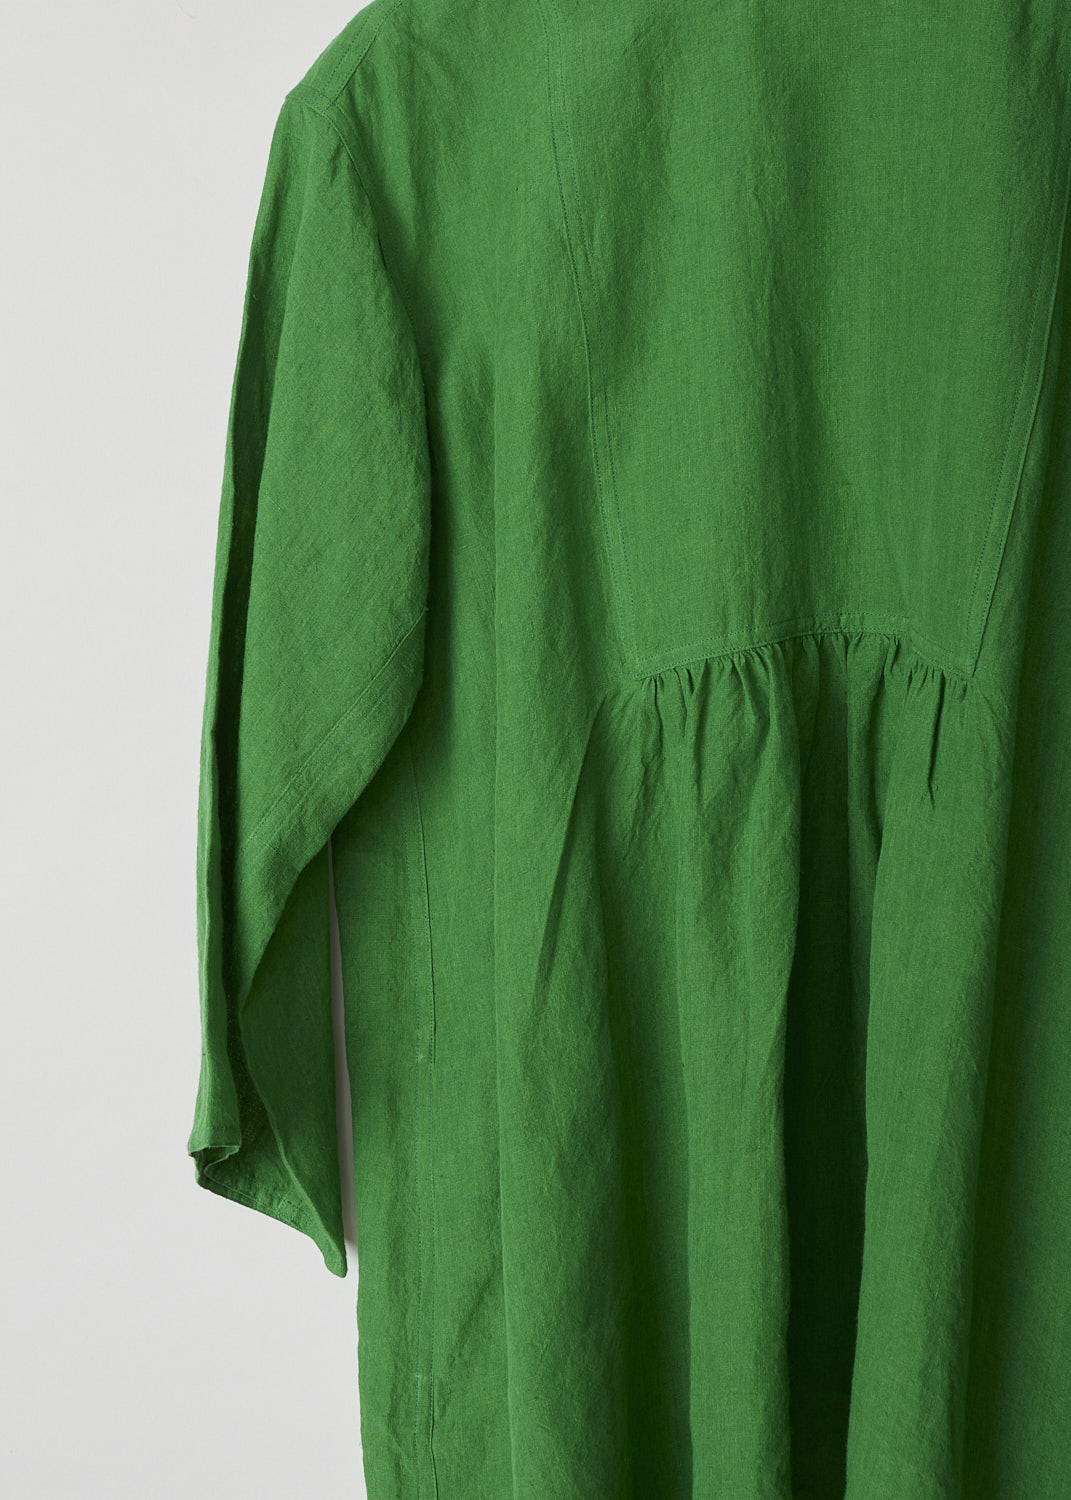 SOFIE Dâ€™HOORE, BRIGHT GREEN BINETTE TOP, BINETTE_LIFE_GRASS, Green, Detail, This oversized bright green top features a round neckline, dropped shoulders and long sleeves. The A-line top has a square bib-like front with pleated details below. Concealed in the side seams, slanted pockets can be found. The top has an asymmetrical finish, meaning the back is a little longer than the front. 

